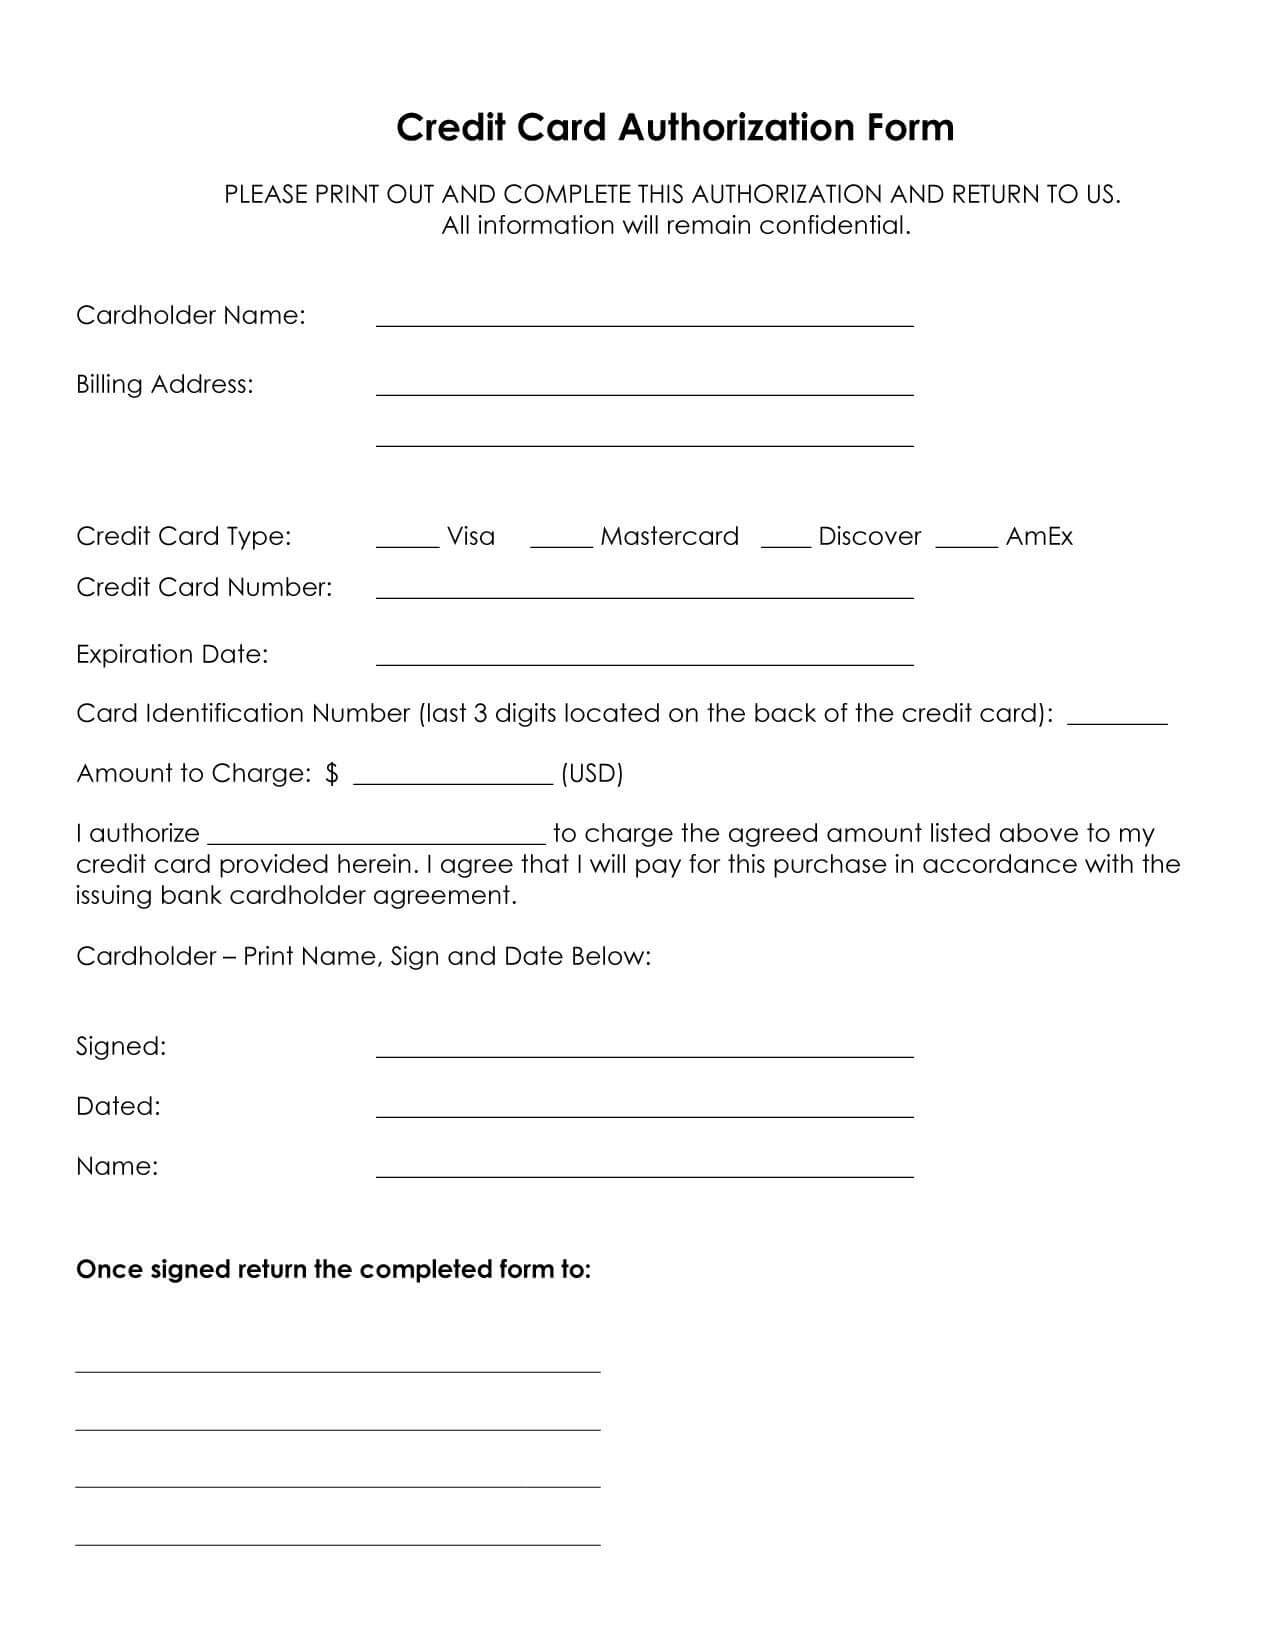 Credit Card Authorization Form Template In 2020 | Credit Regarding Credit Card Billing Authorization Form Template